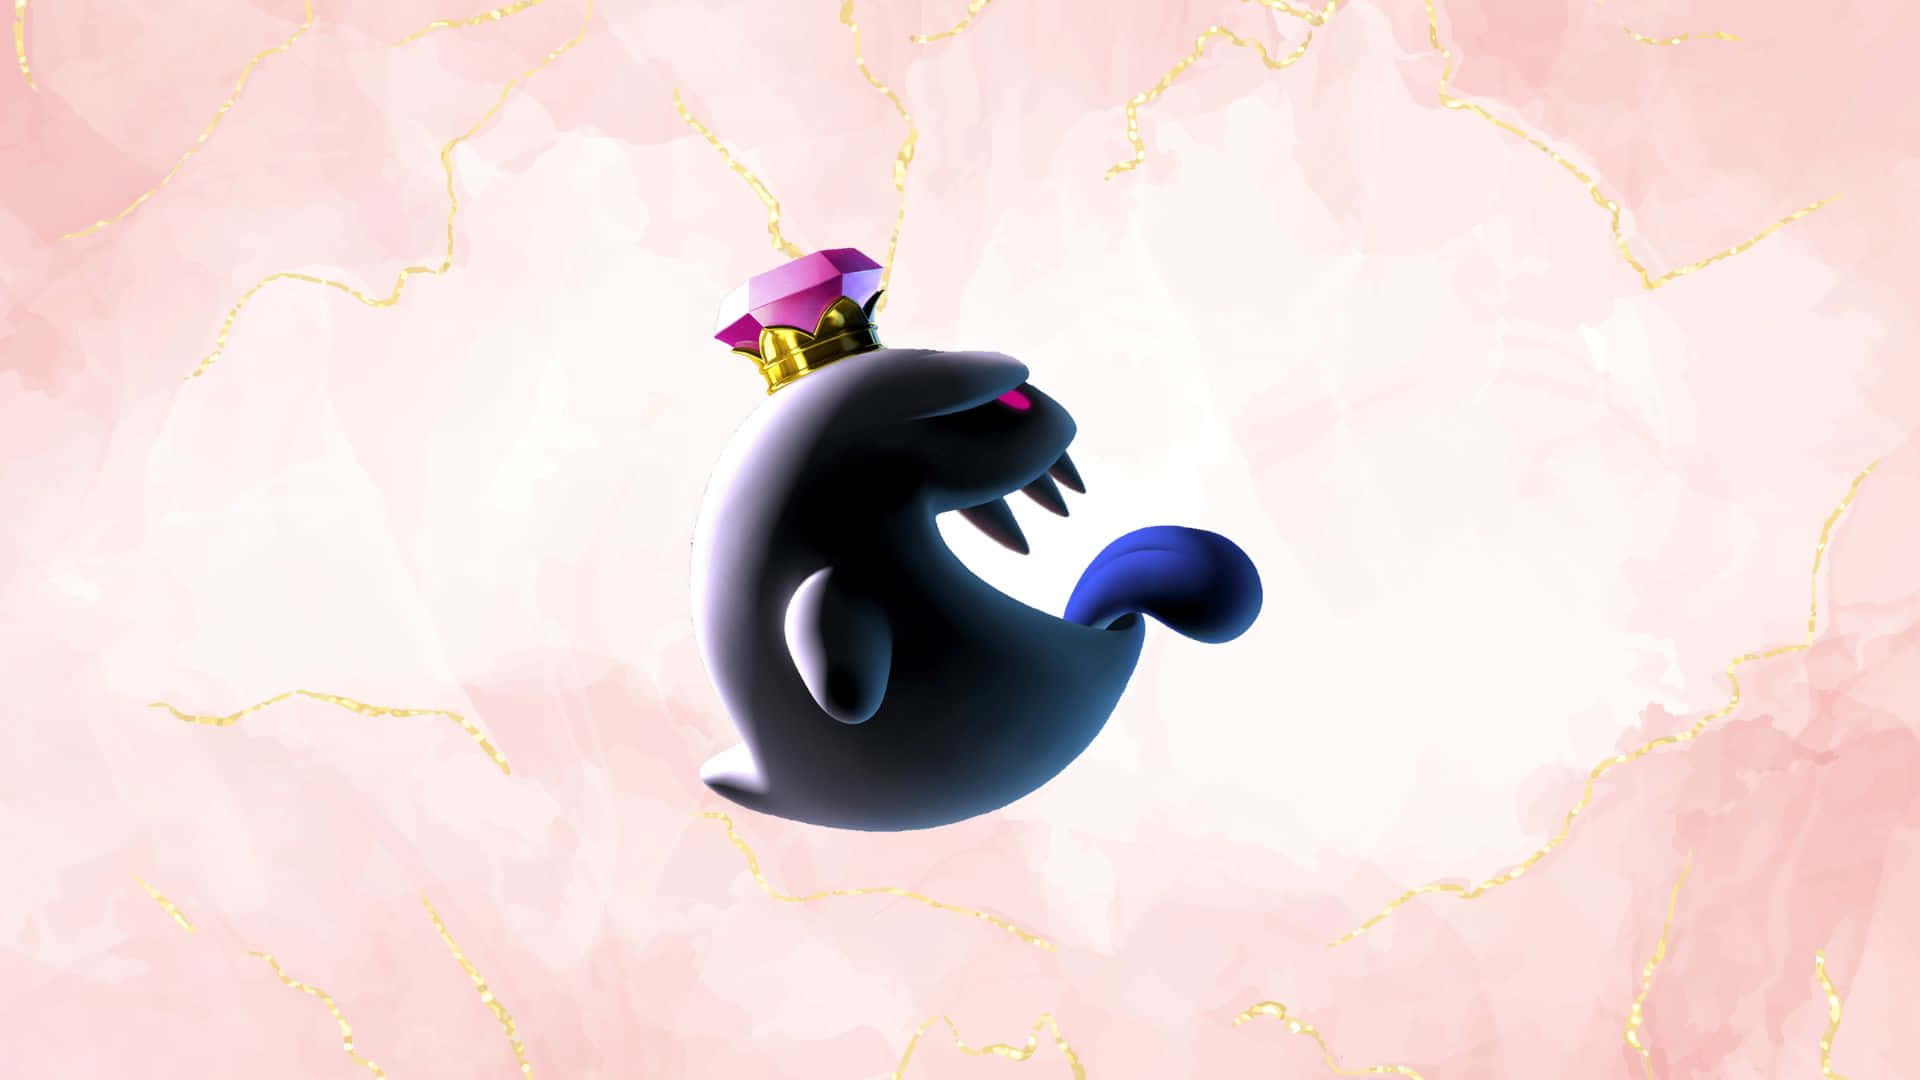 Fearsome King Boo ruling the ghostly kingdom in high-resolution wallpaper. Wallpaper